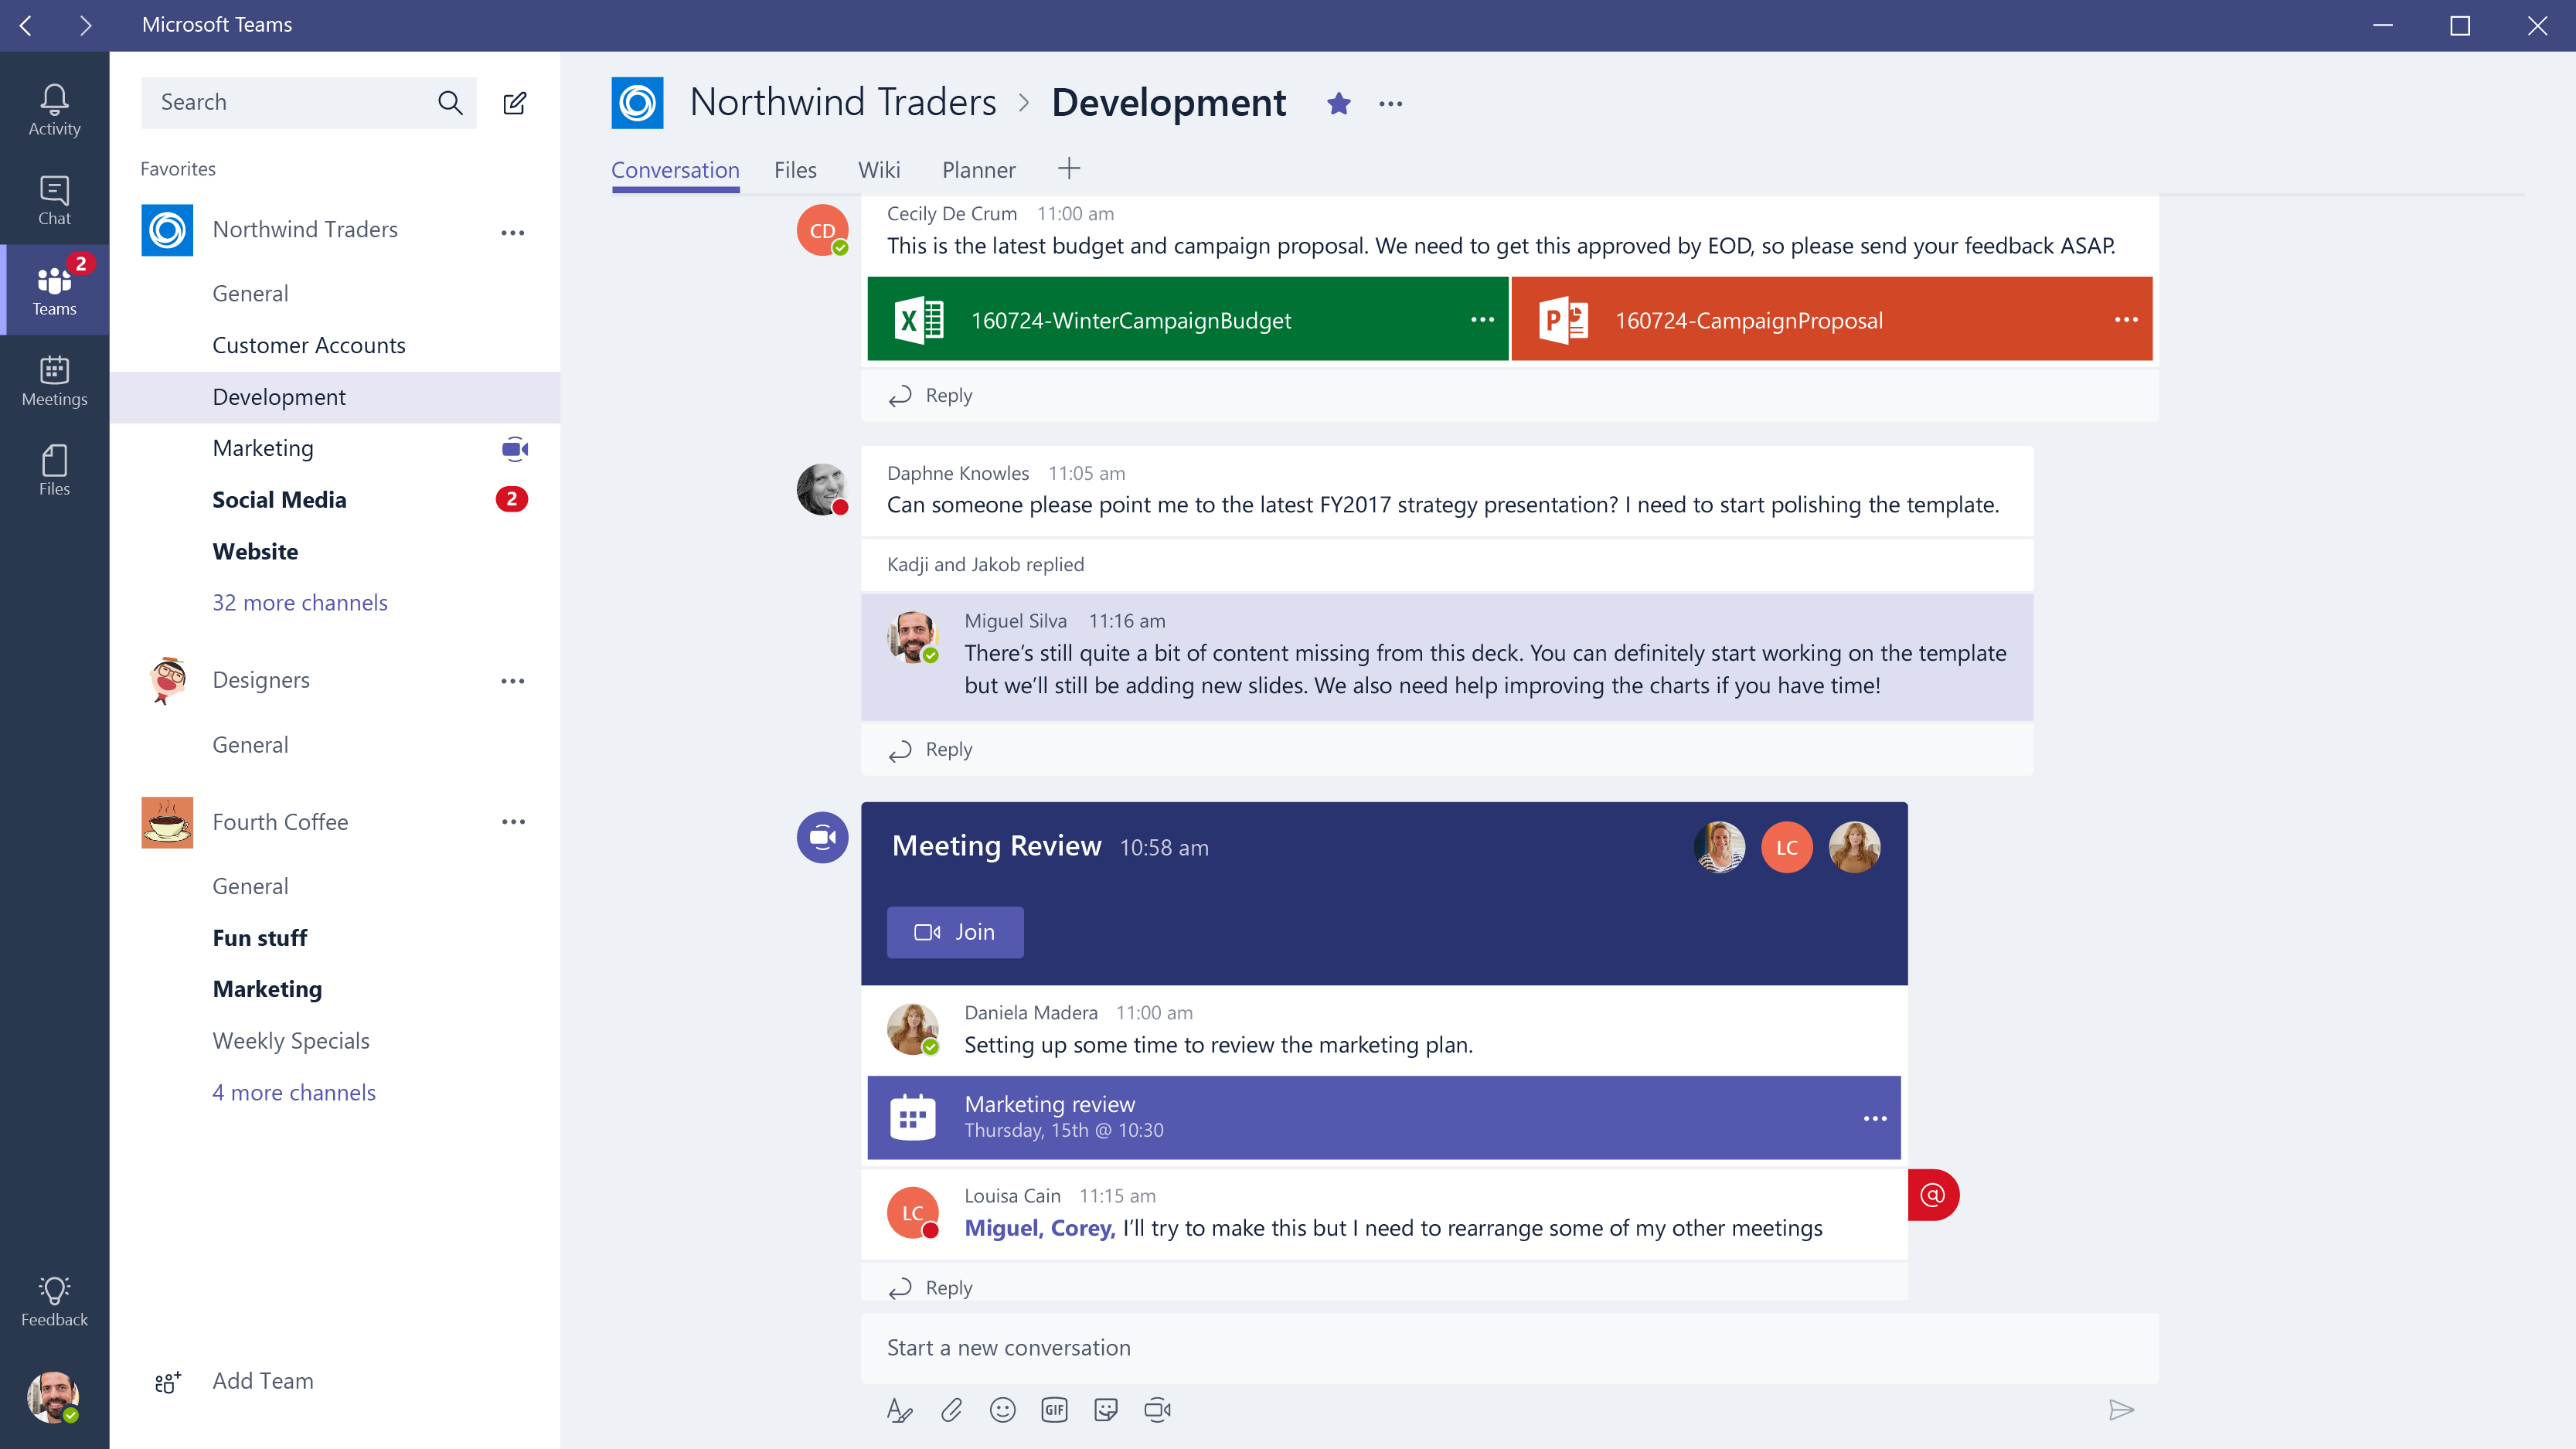 Microsoft Teams rolls out to Office 365 customers worldwide 